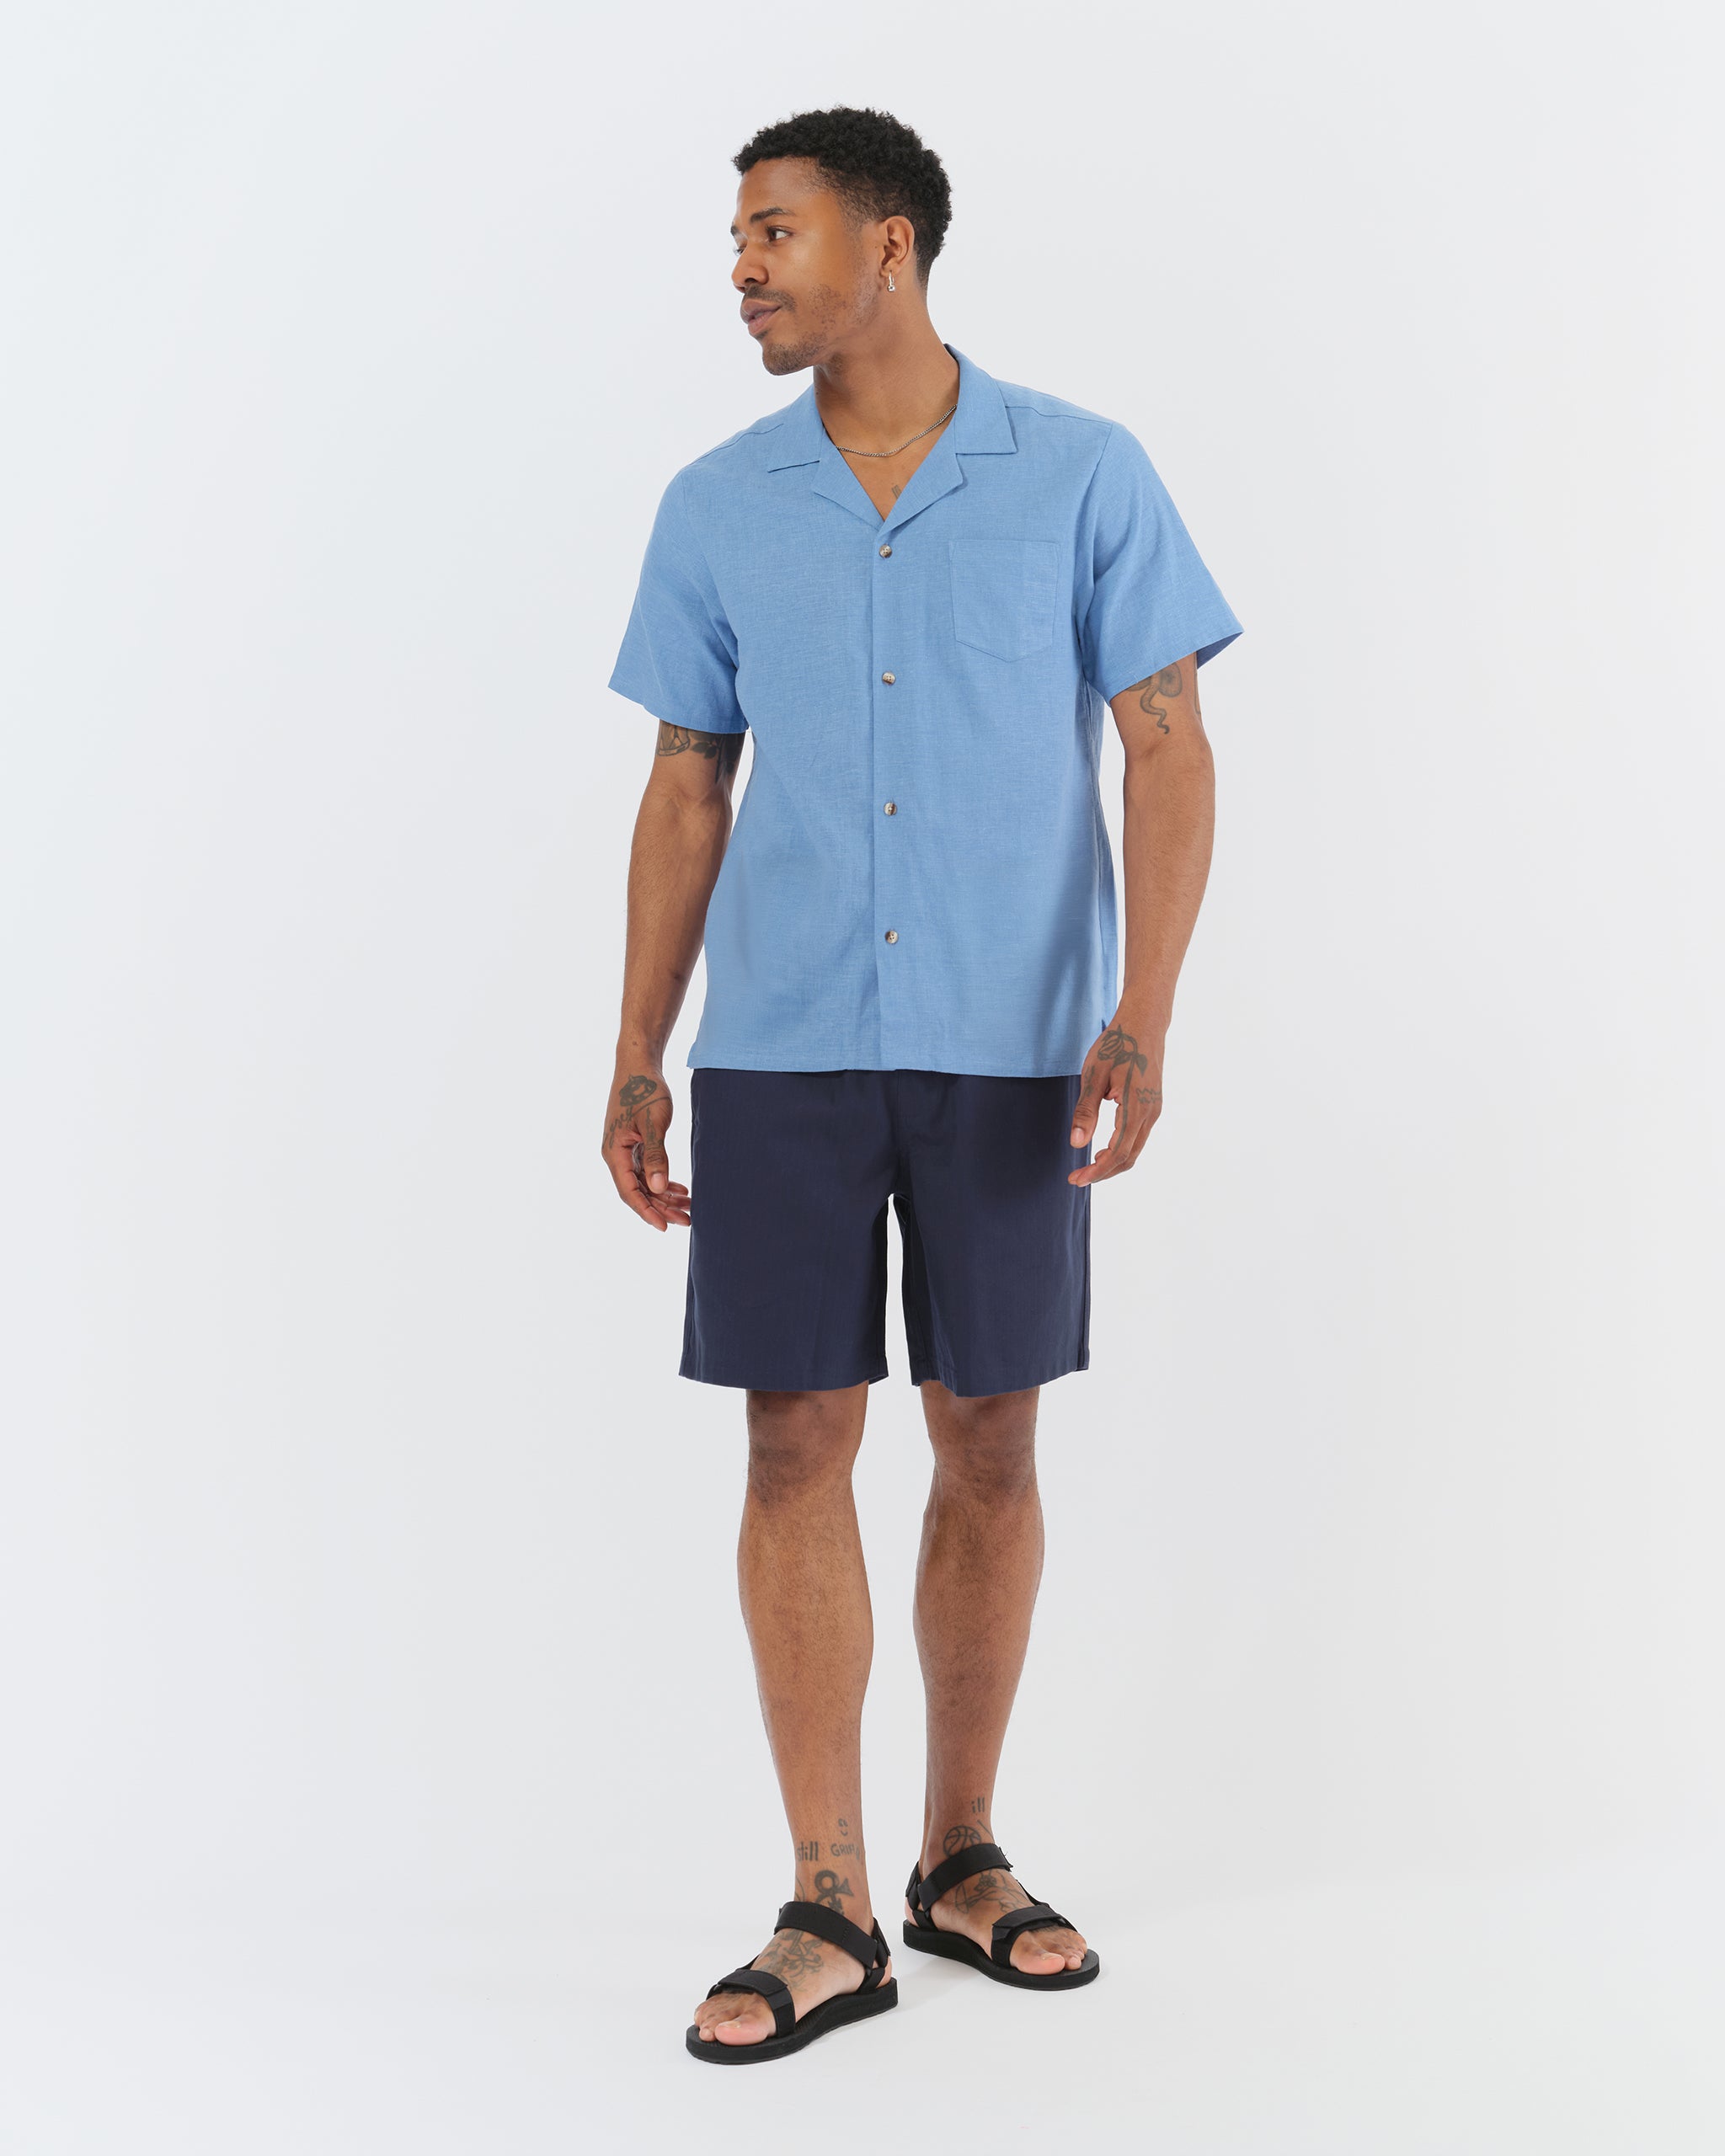 Blue linen camp shirt with a chest pocket and two bottom front pockets on model